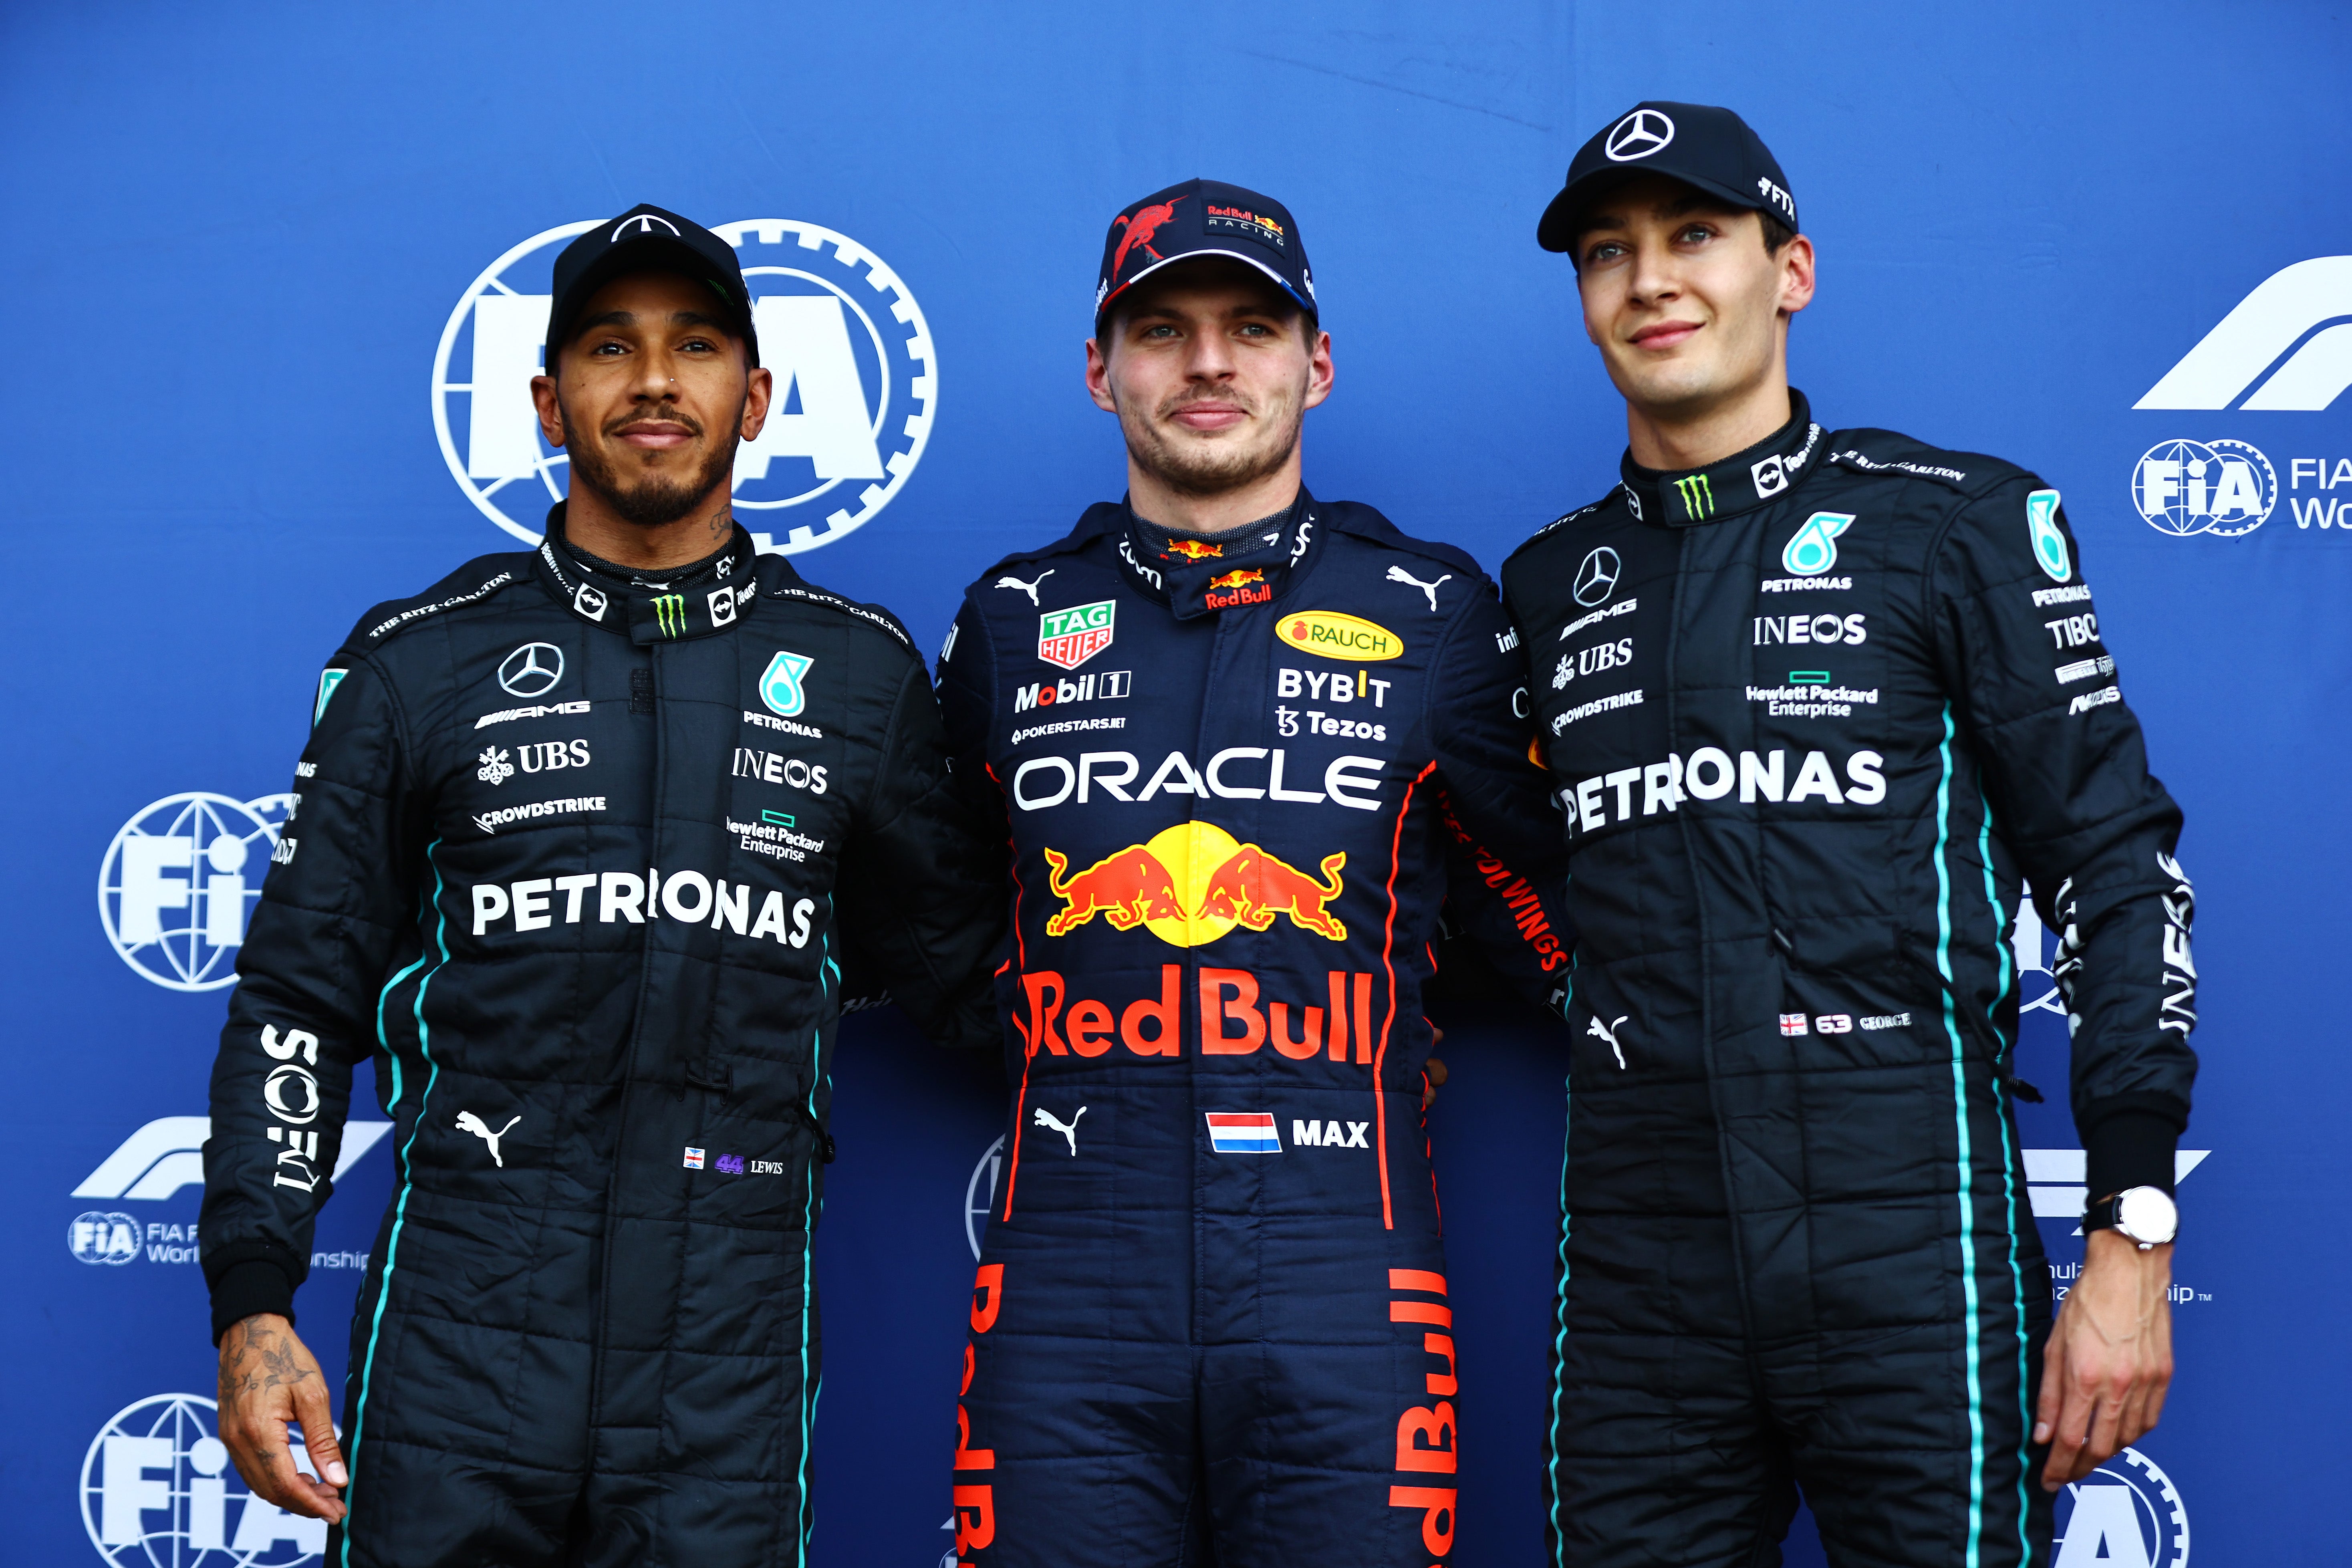 Max Verstappen claimed pole in Mexico, with George Russell in second and Lewis Hamilton starting in third